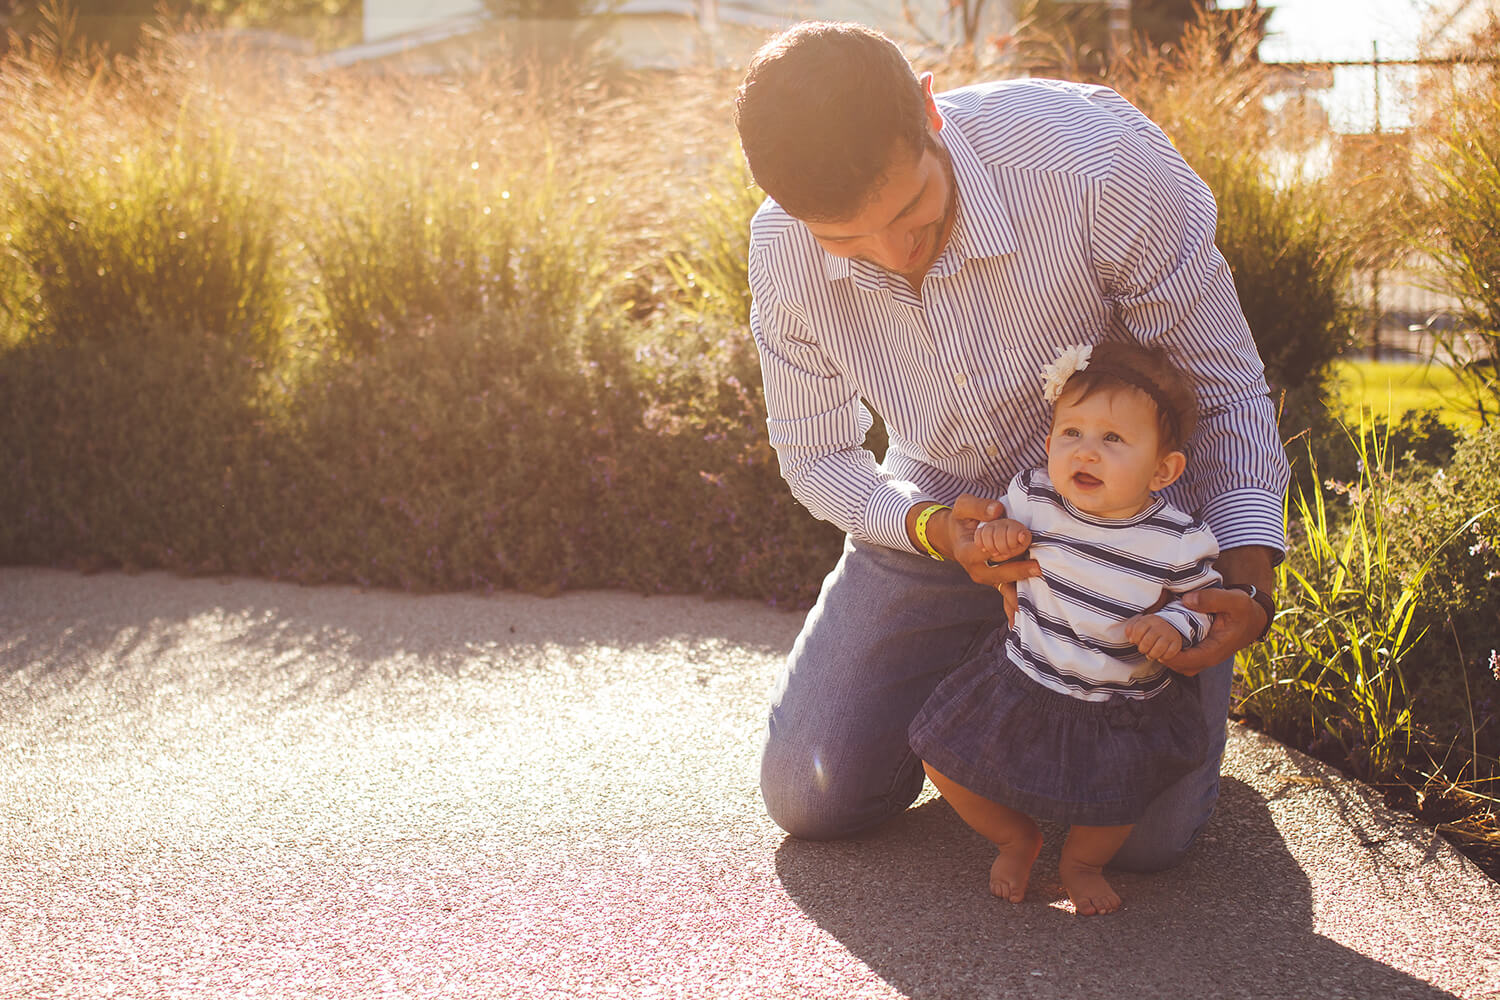 Baby girl is held up by her dad who is kneeling behind her as the sun sets golden light behind them.